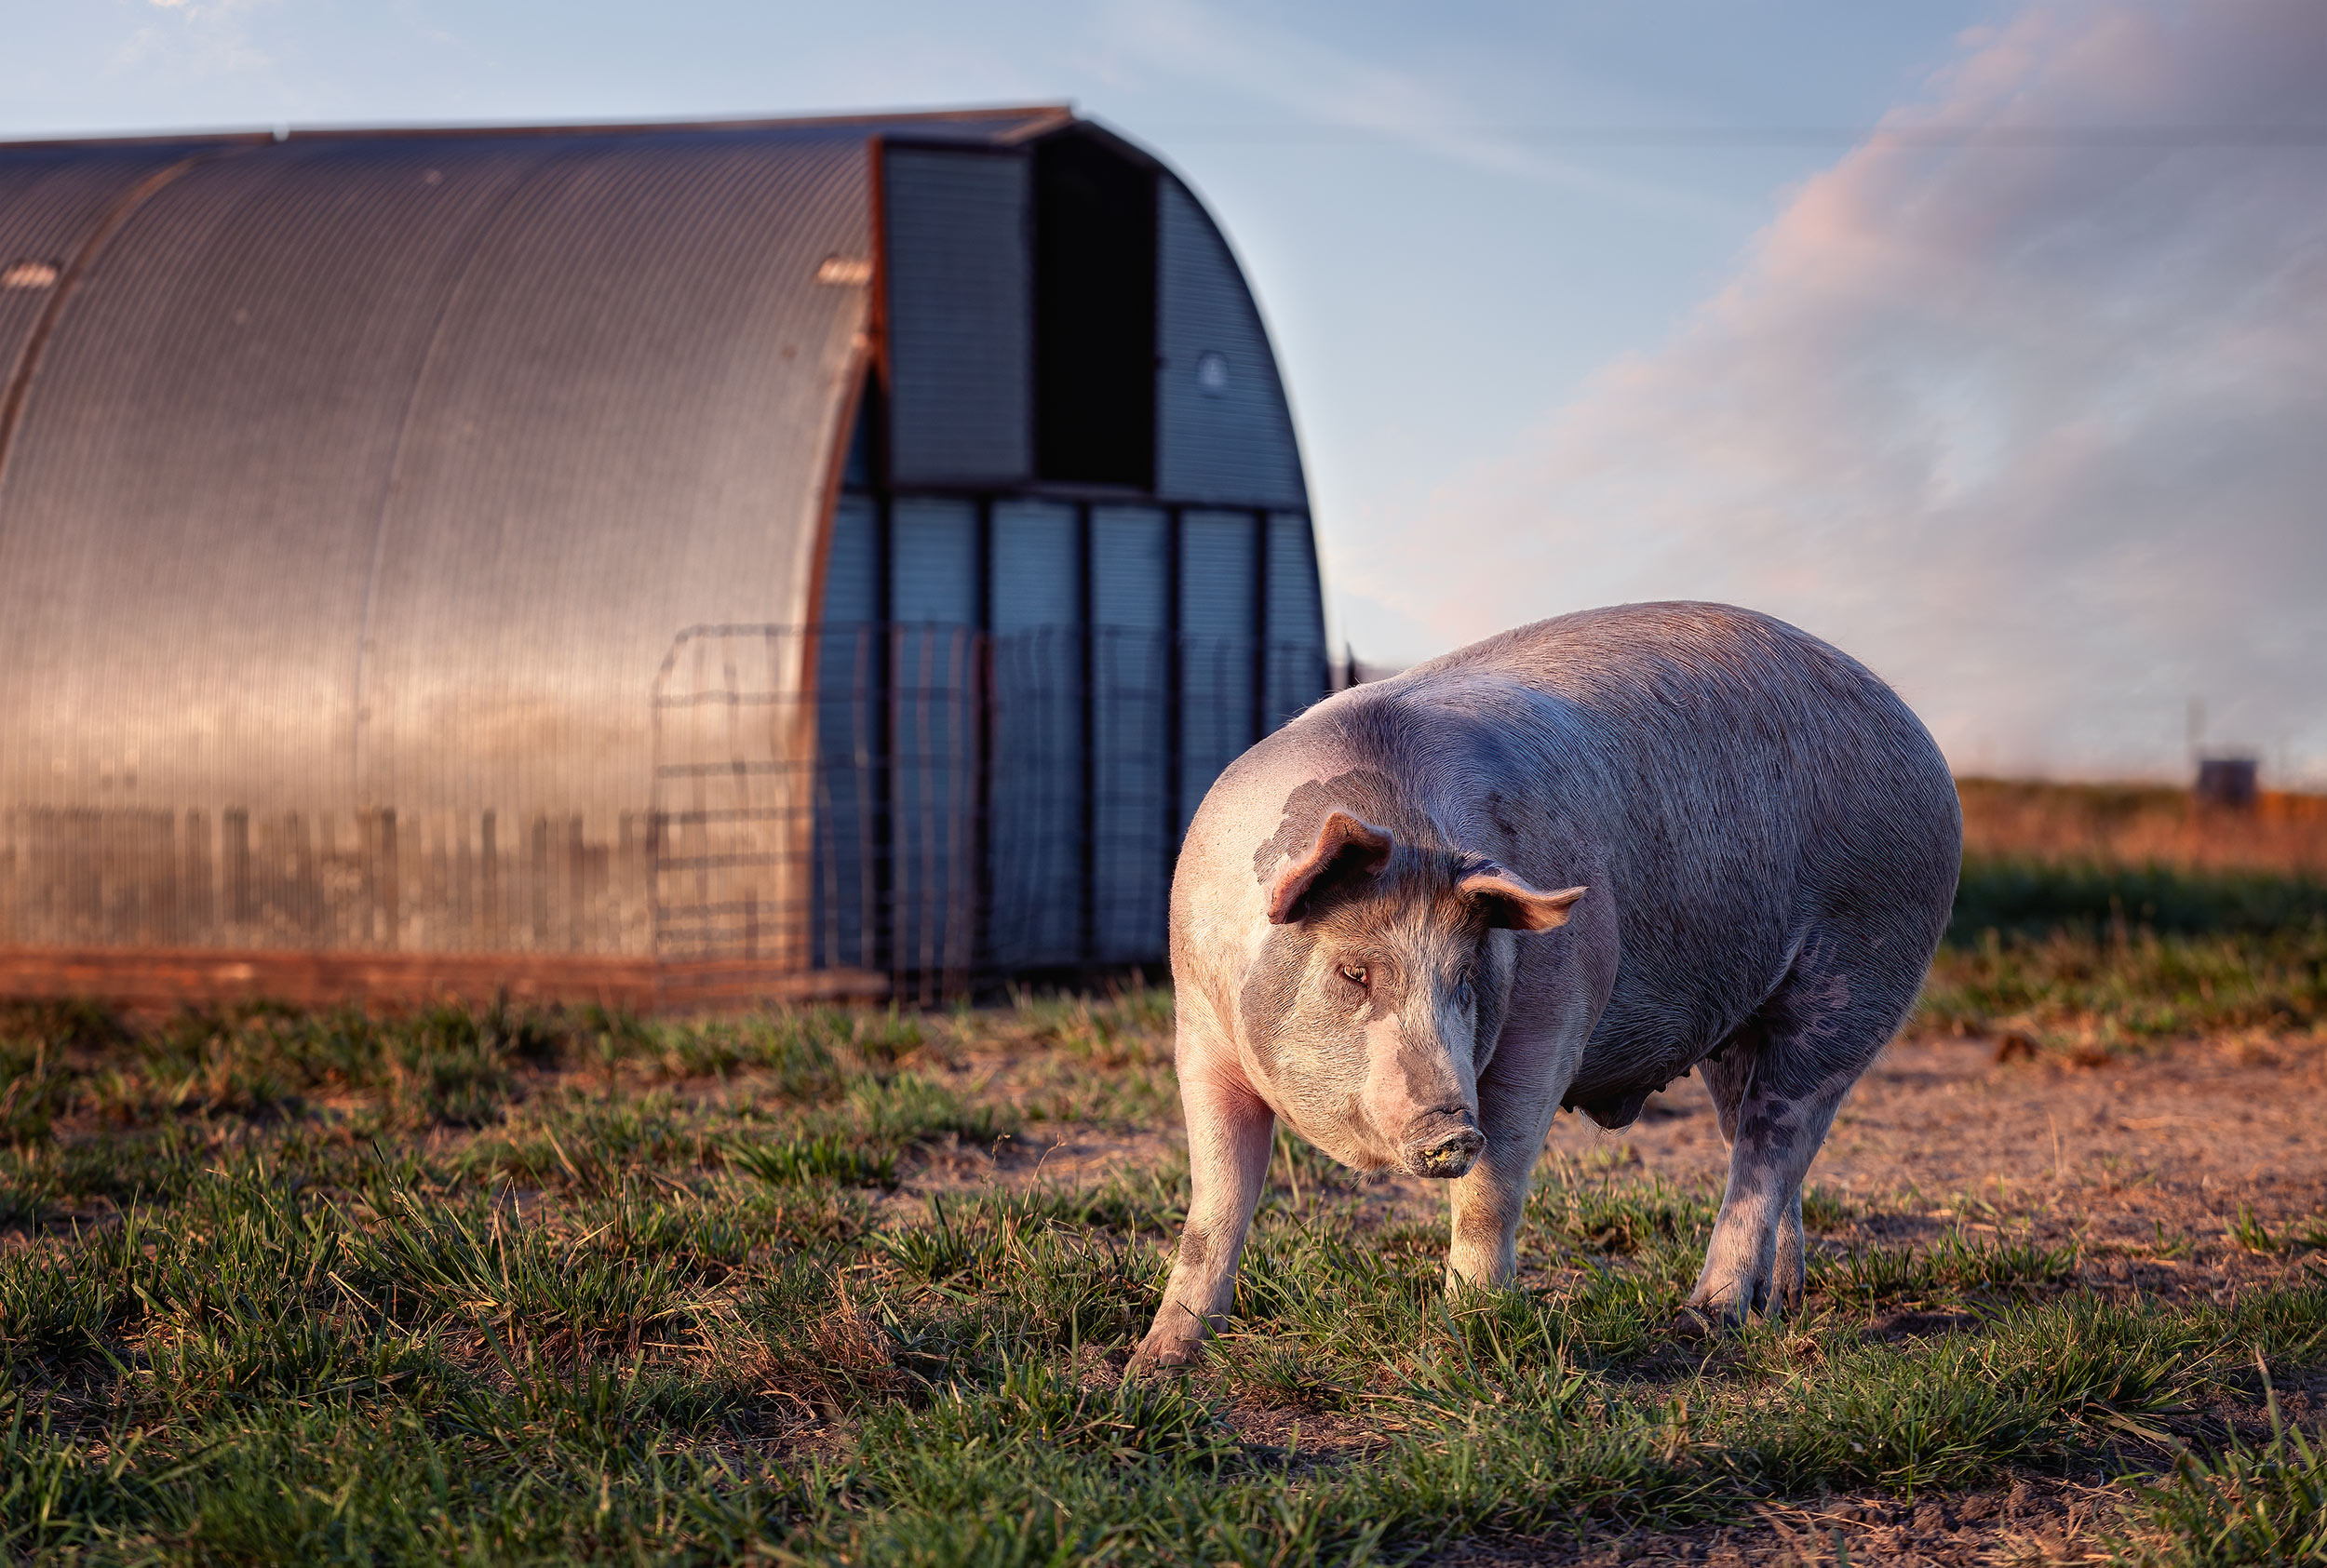 Free range sow posing in front of her hut. Agriculture Photography